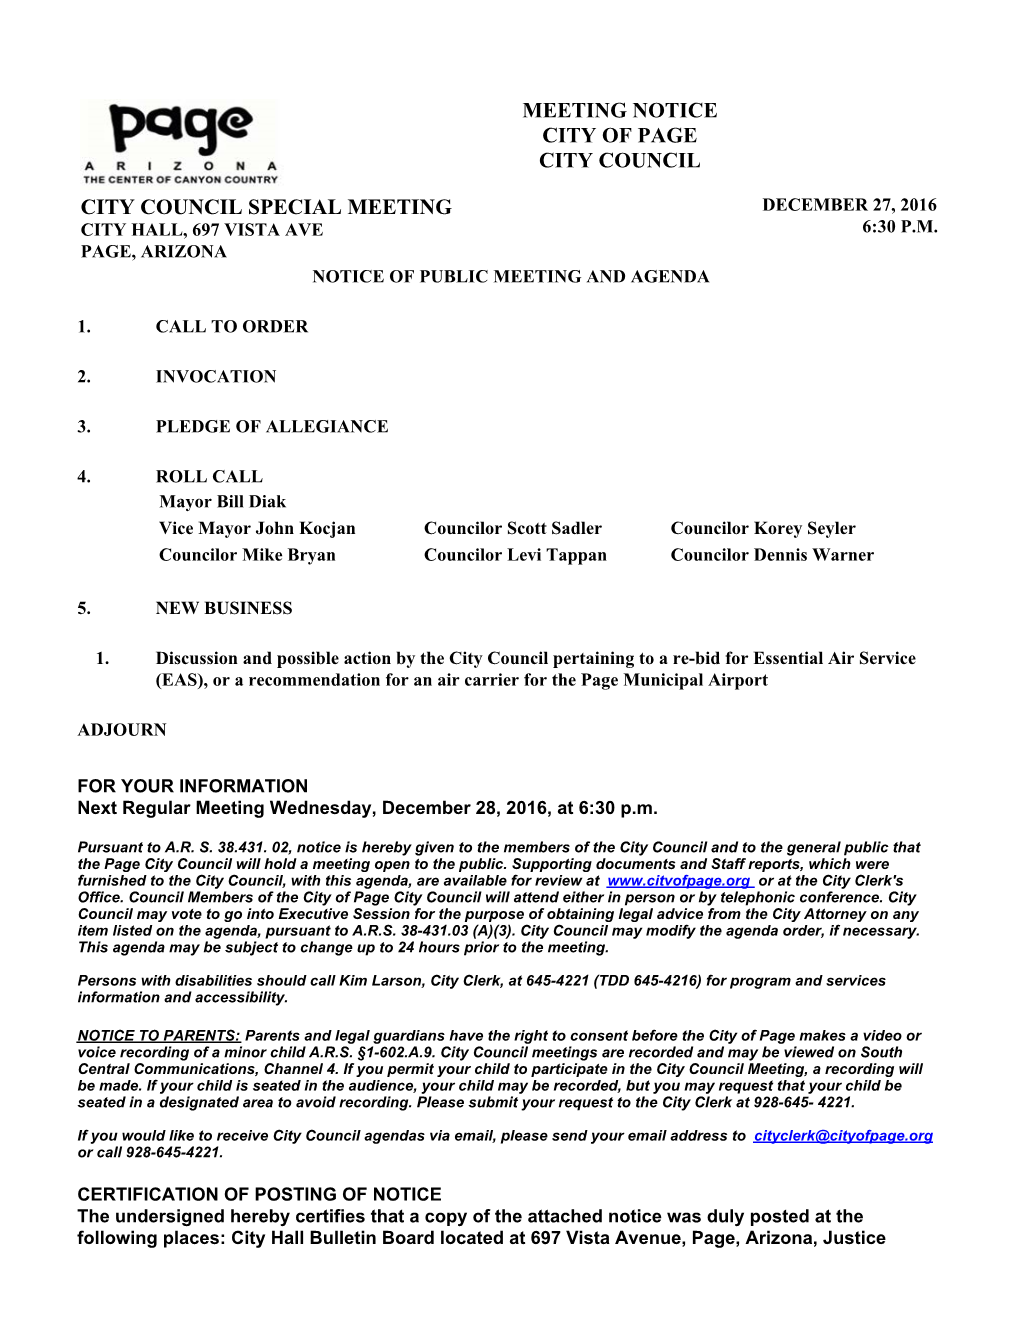 Meeting Notice City of Page City Council City Council